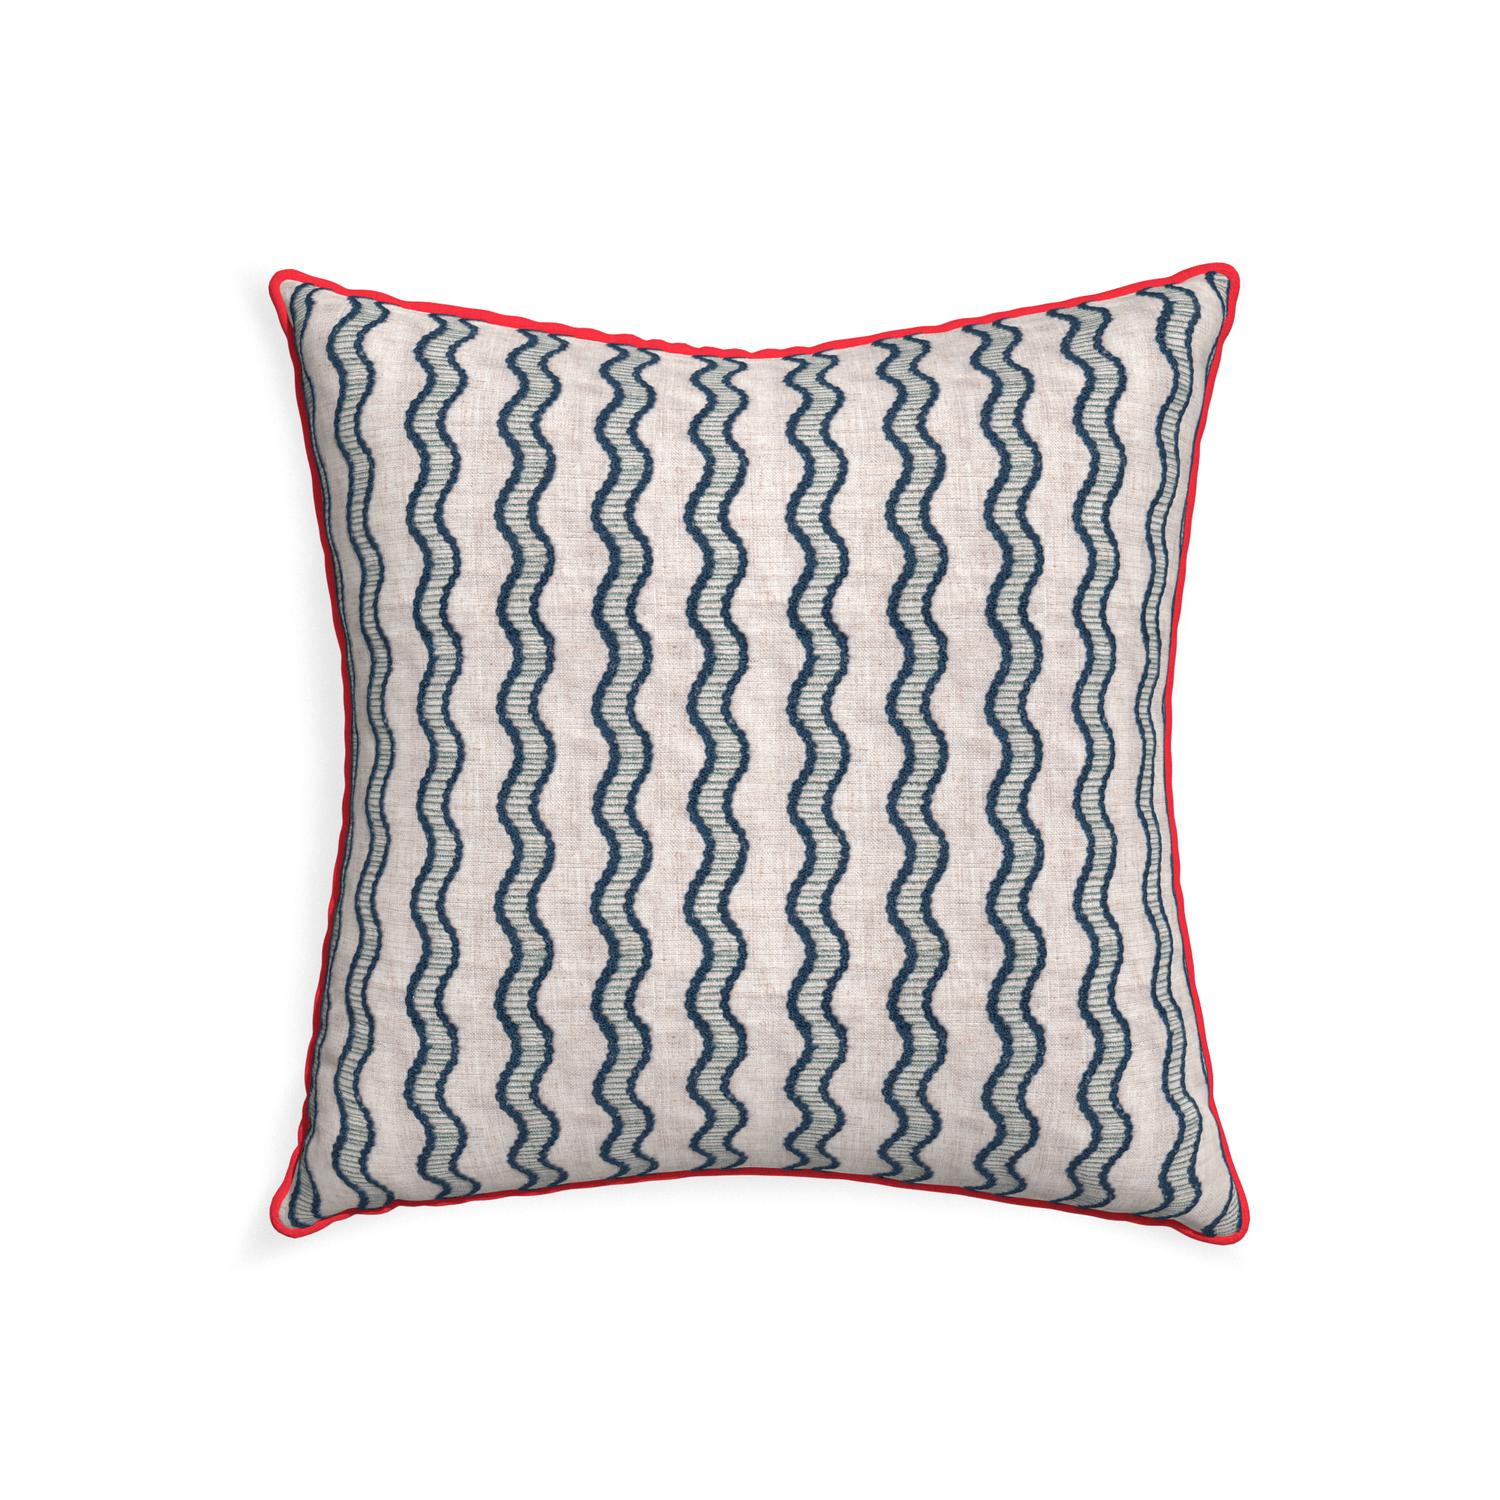 22-square beatrice custom embroidered wavepillow with cherry piping on white background